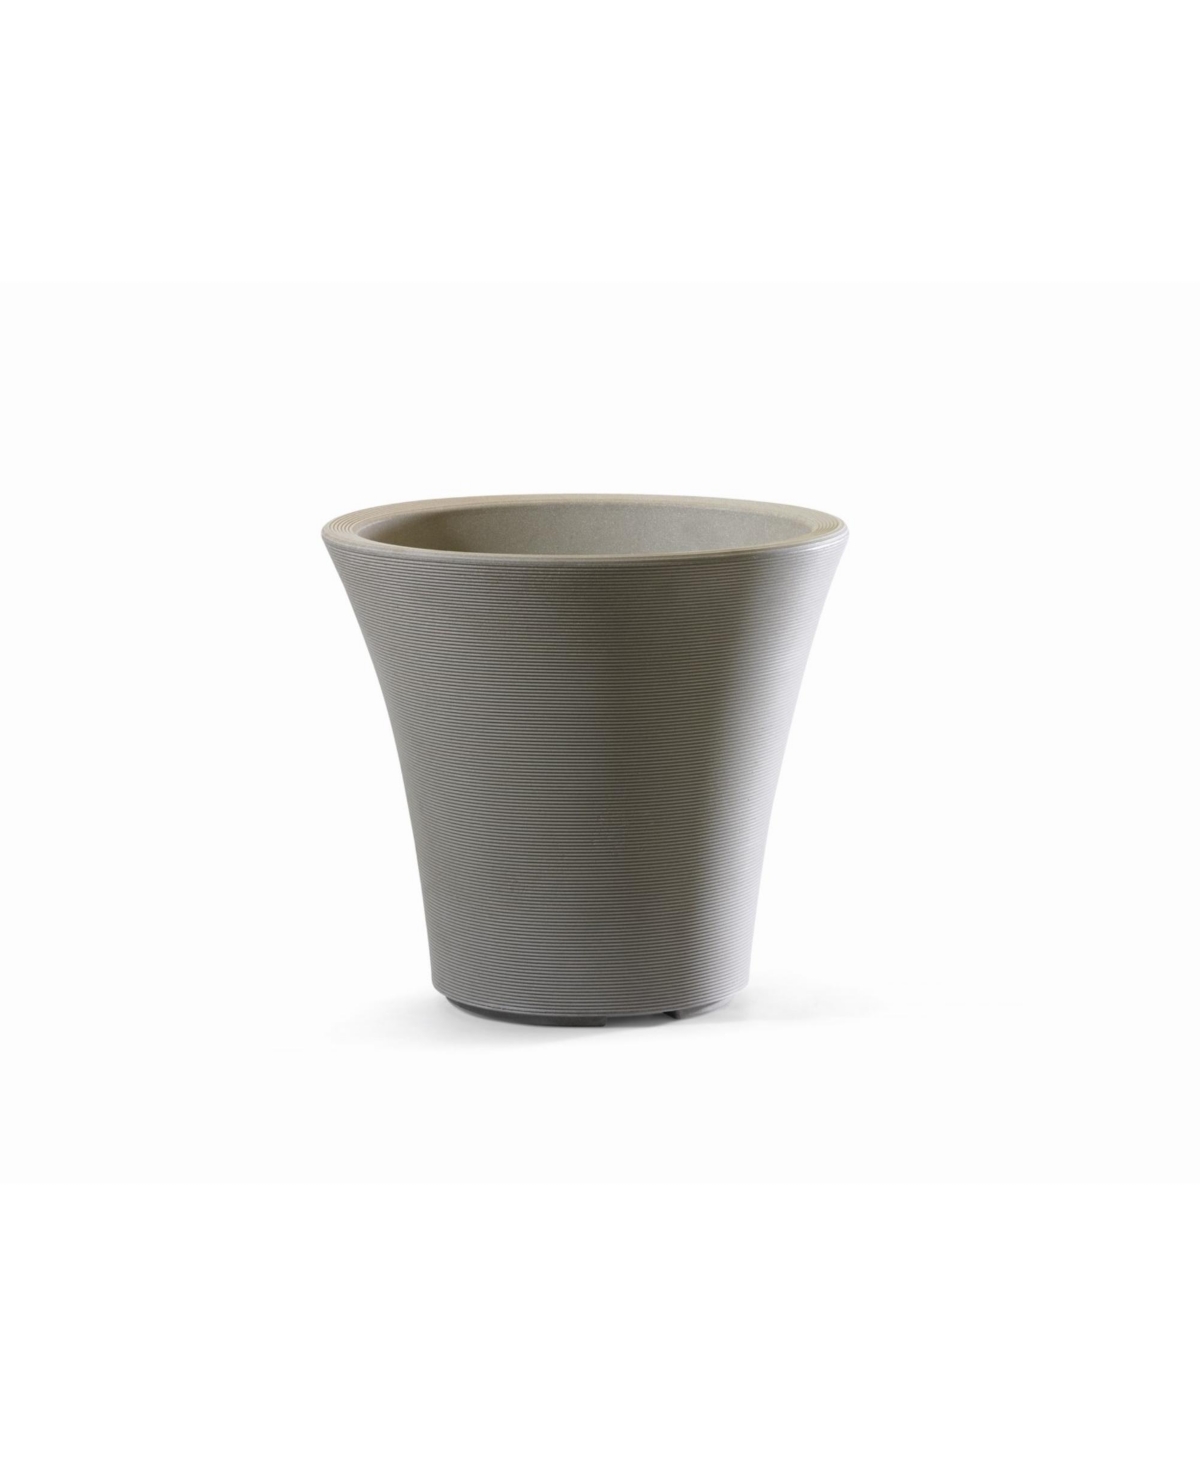 B08312S110 Pamploma Planter Sand 12 Inches - Brown